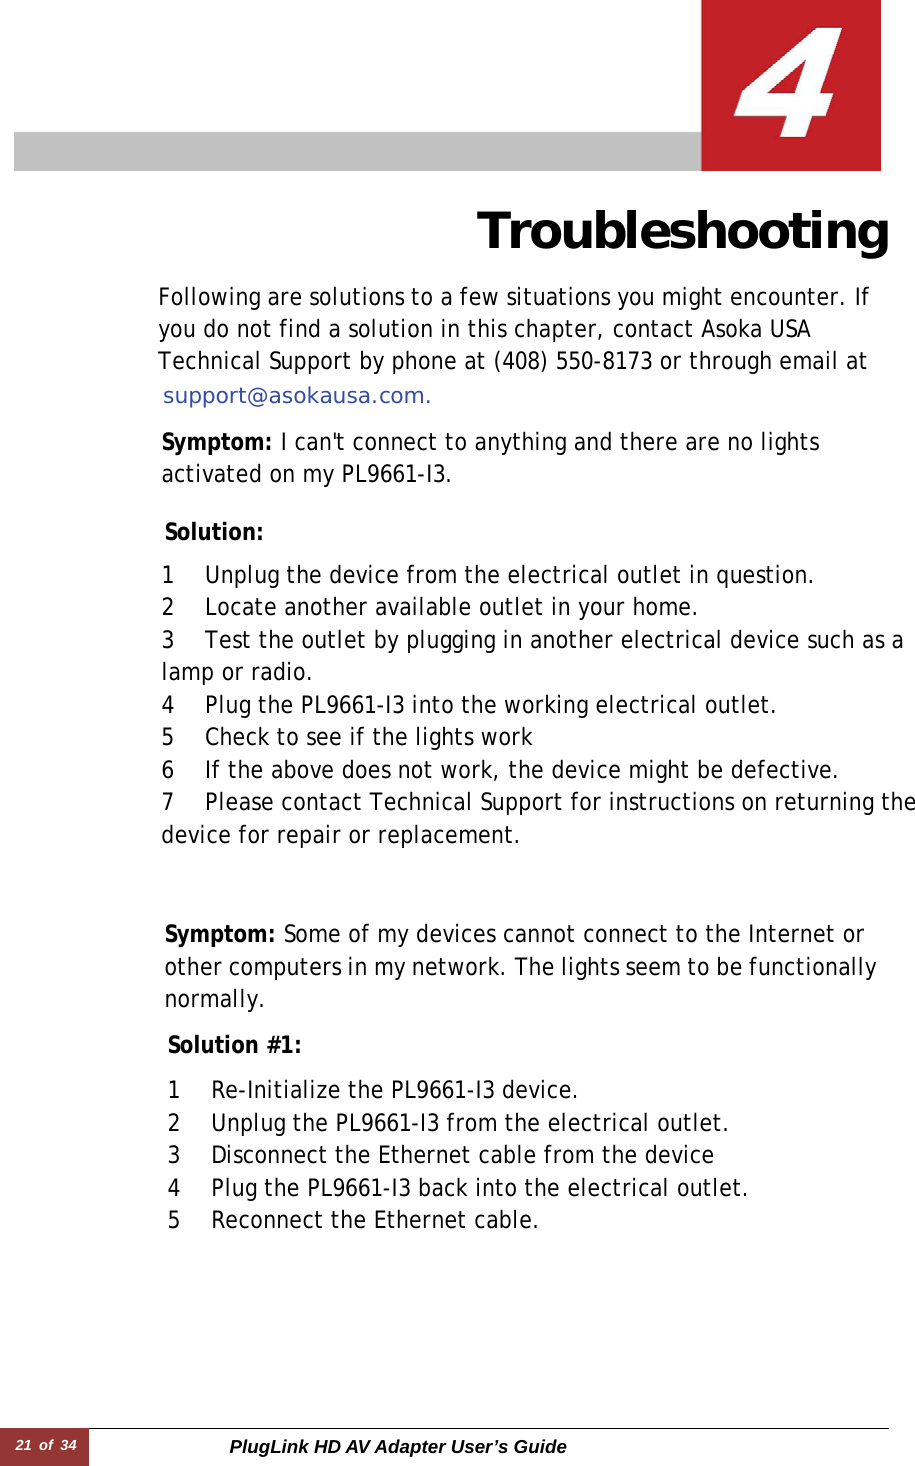 21 of 34  PlugLink HD AV Adapter User’s Guide                 Troubleshooting  Following are solutions to a few situations you might encounter. If you do not find a solution in this chapter, contact Asoka USA Technical Support by phone at (408) 550-8173 or through email at support@asokausa.com.  Symptom: I can&apos;t connect to anything and there are no lights activated on my PL9661-I3.  Solution:  1 Unplug the device from the electrical outlet in question.  2 Locate another available outlet in your home.  3 Test the outlet by plugging in another electrical device such as a lamp or radio.  4 Plug the PL9661-I3 into the working electrical outlet.  5 Check to see if the lights work  6 If the above does not work, the device might be defective.  7 Please contact Technical Support for instructions on returning the device for repair or replacement.  Symptom: Some of my devices cannot connect to the Internet or other computers in my network. The lights seem to be functionallynormally.  Solution #1:   1 Re-Initialize the PL9661-I3 device.  2 Unplug the PL9661-I3 from the electrical outlet.  3 Disconnect the Ethernet cable from the device  4 Plug the PL9661-I3 back into the electrical outlet.  5 Reconnect the Ethernet cable.  